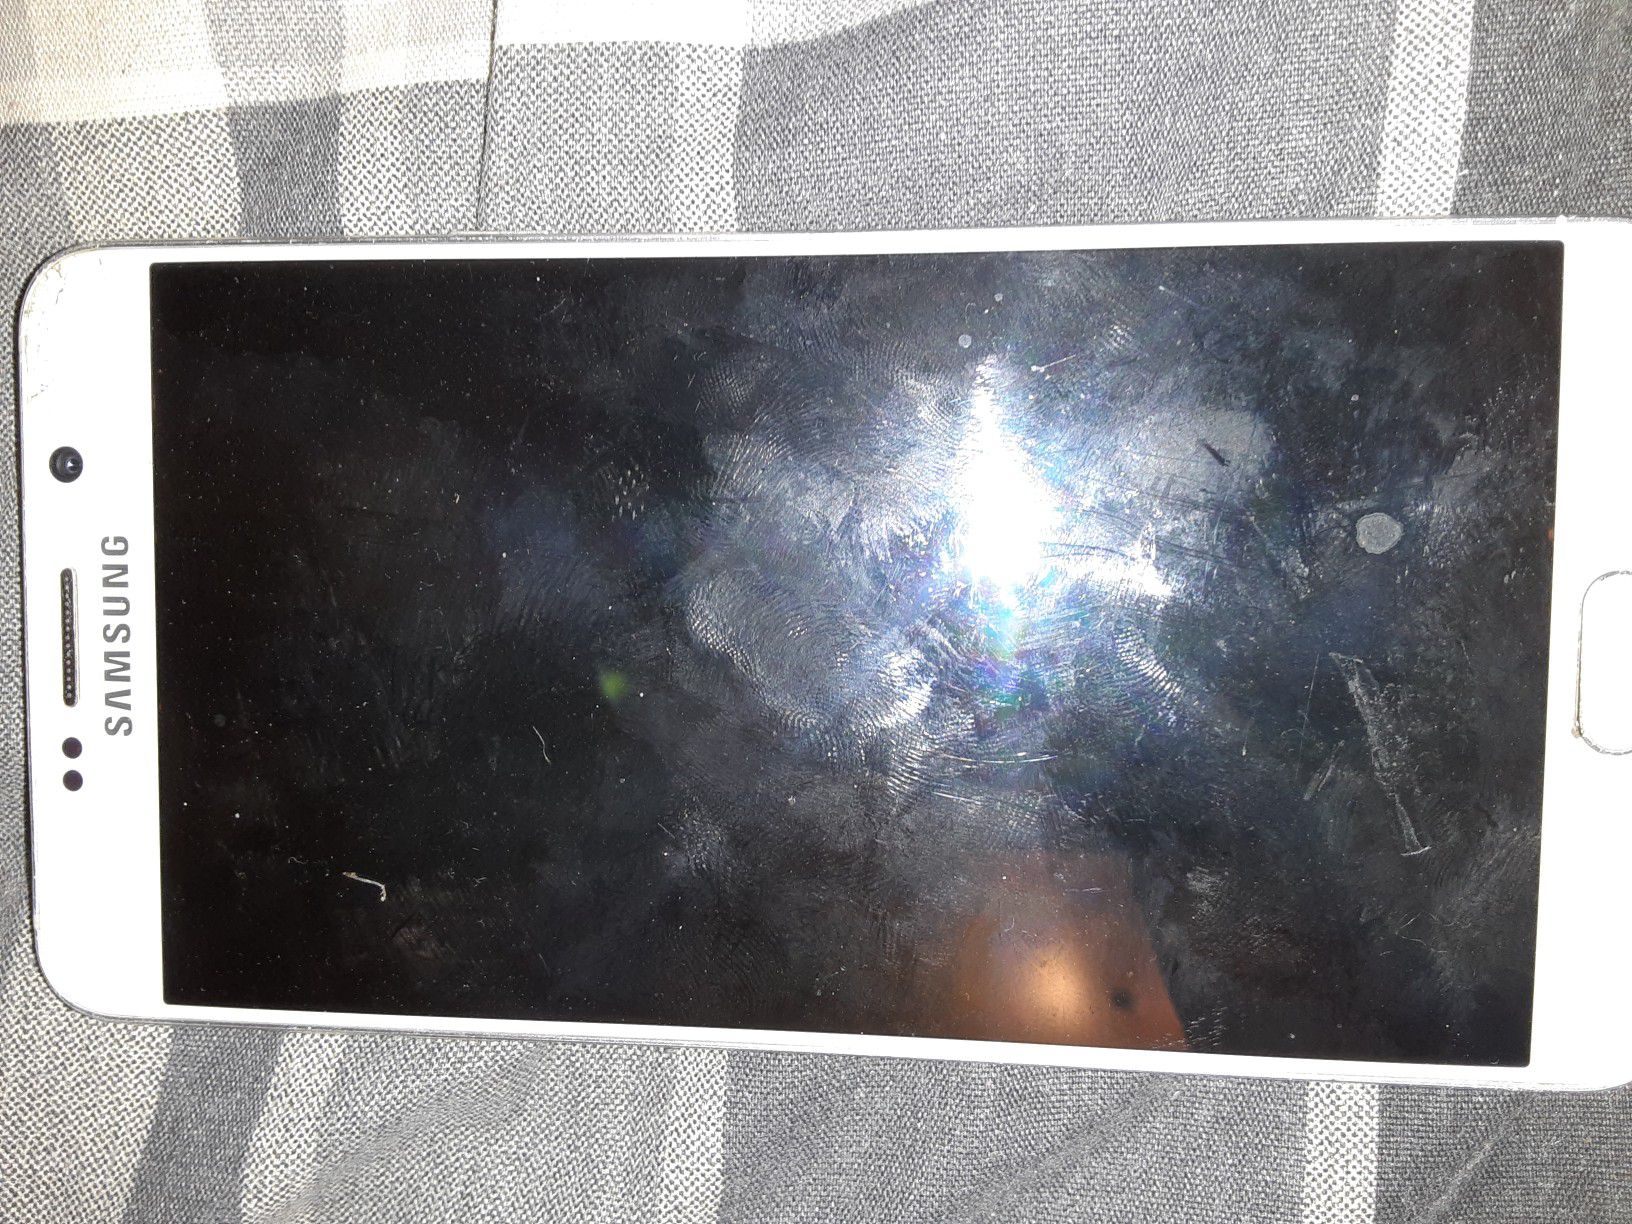 Samsung Galaxy phone. Dont know what's wrong with it